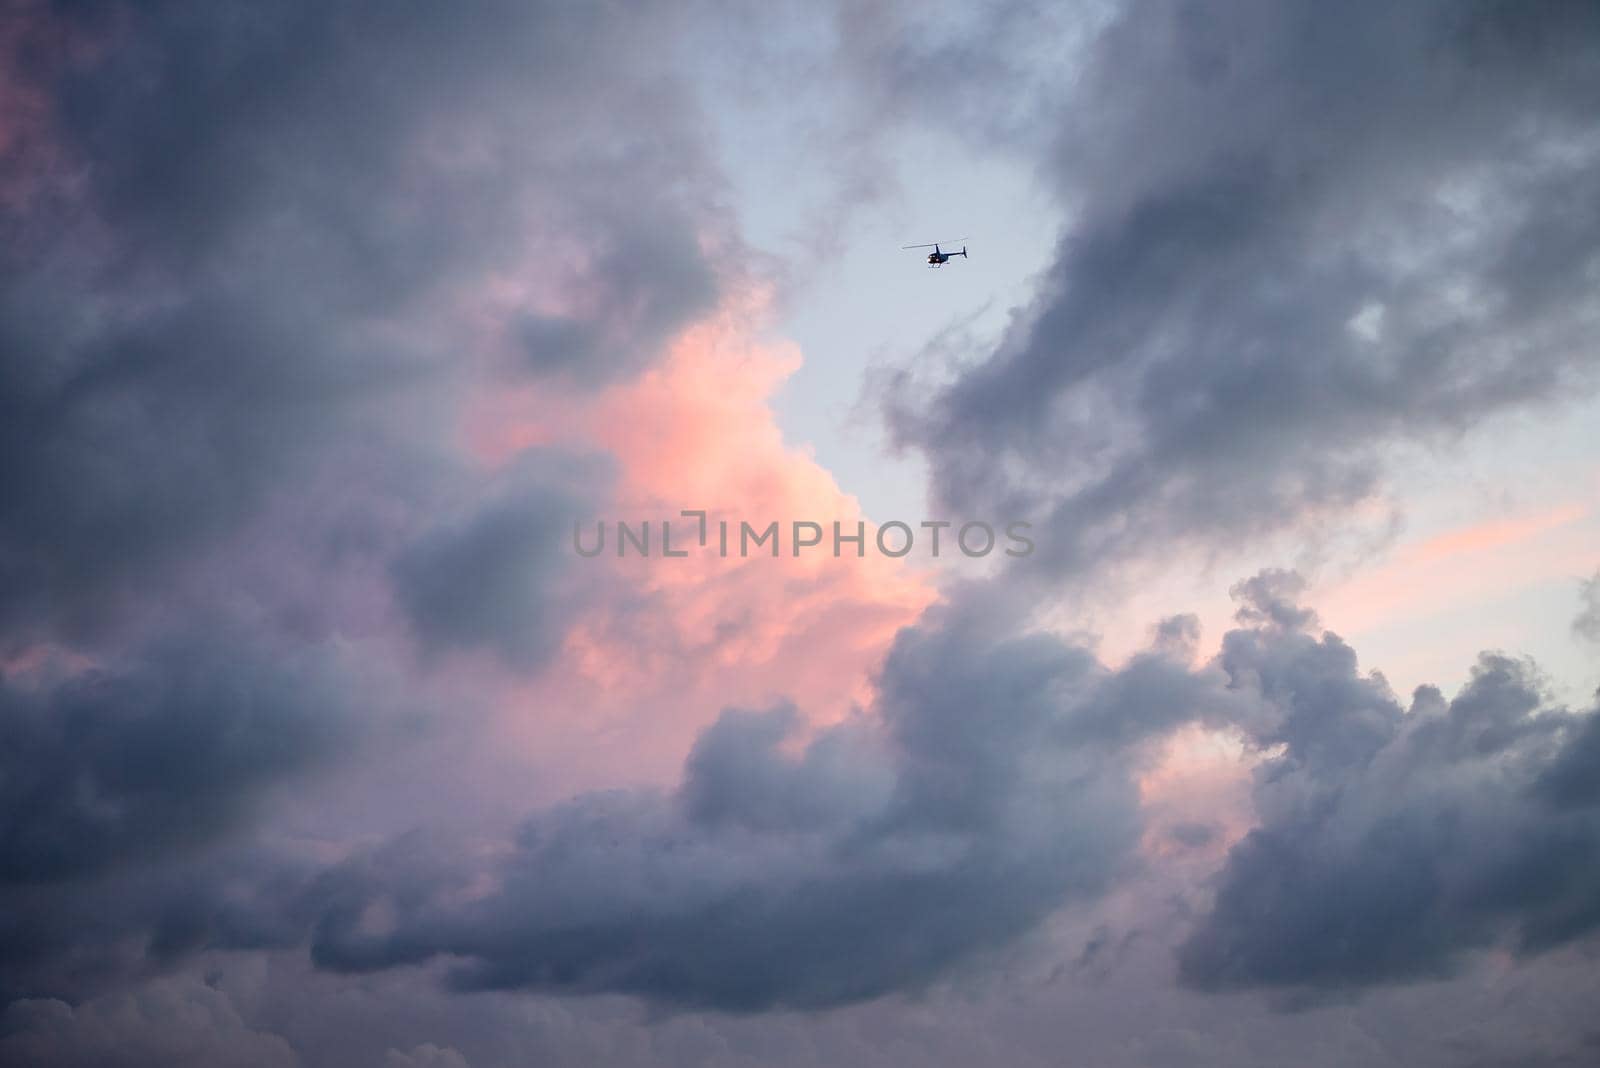 View of pastel pink and purple clouds with single object helicopter flying into the abyss. Artistic view of sky by jyurinko